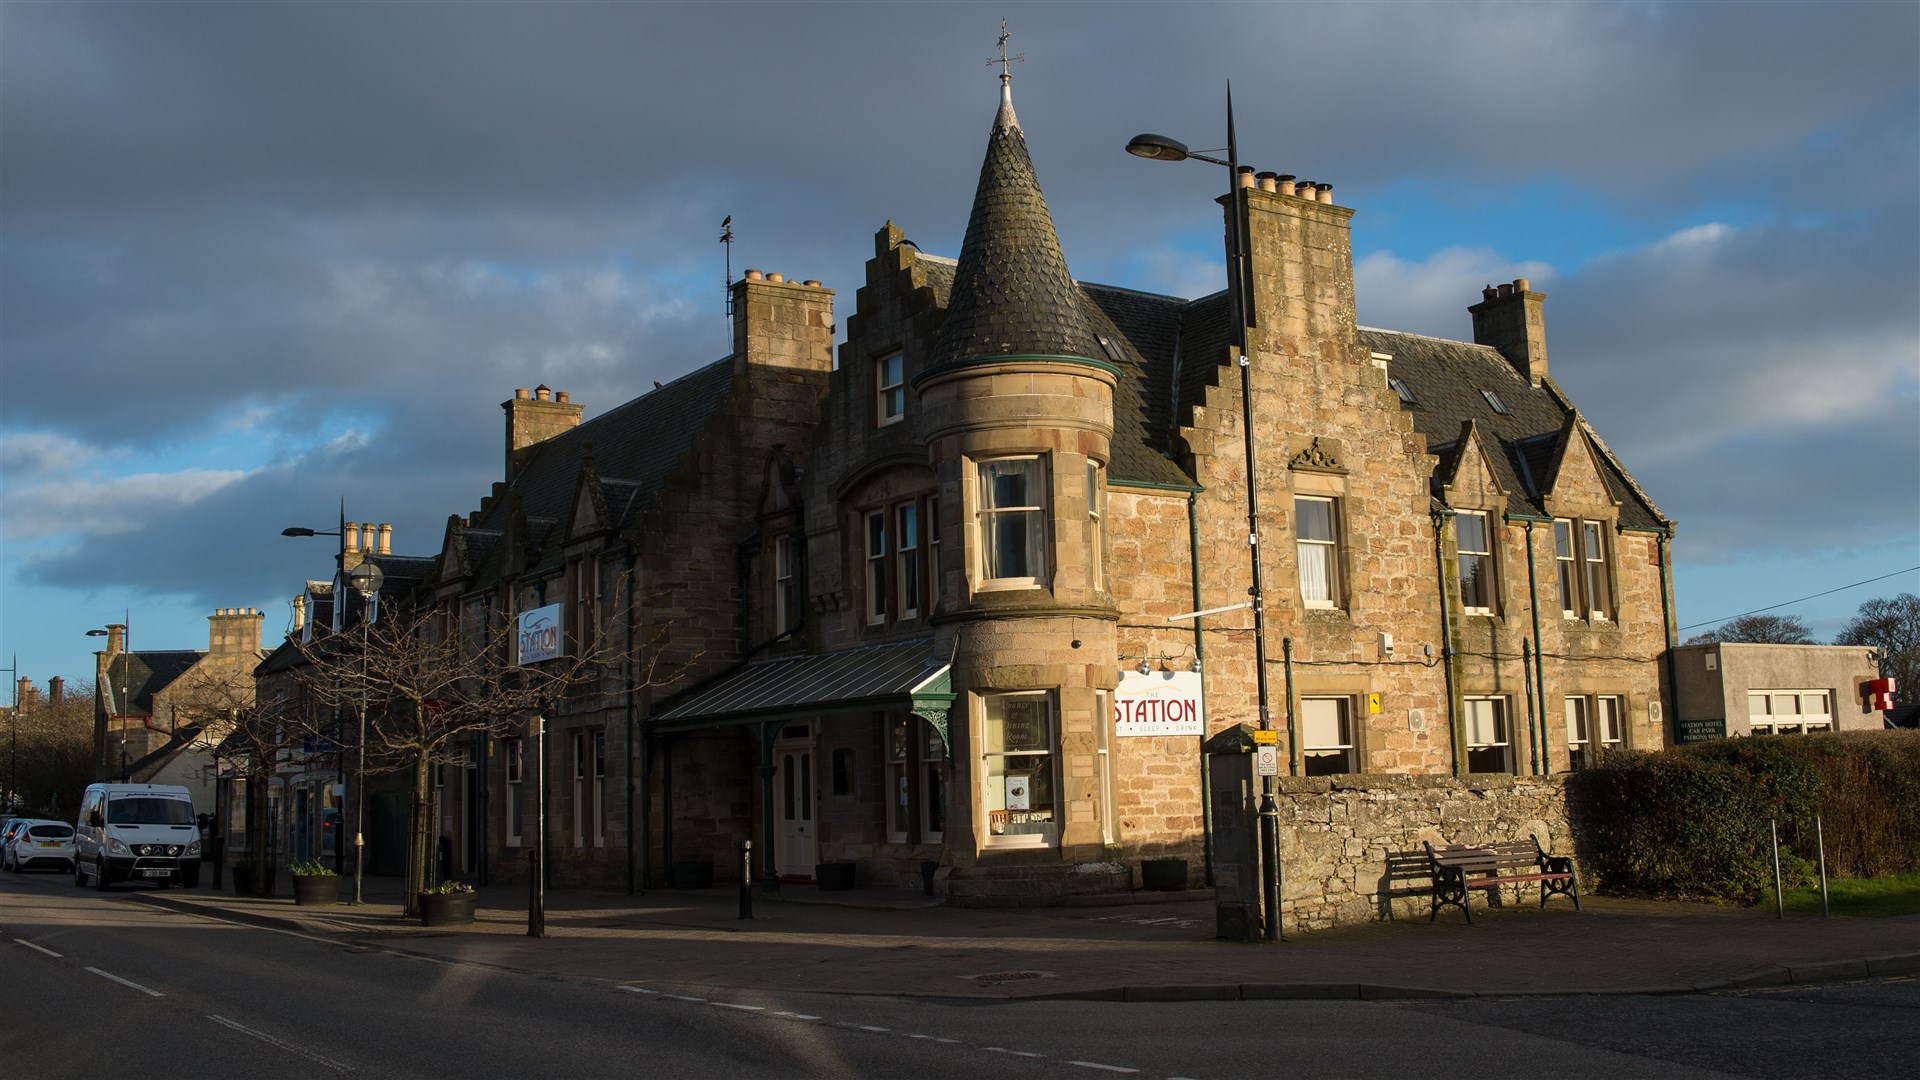 The Station Hotel in Alness.